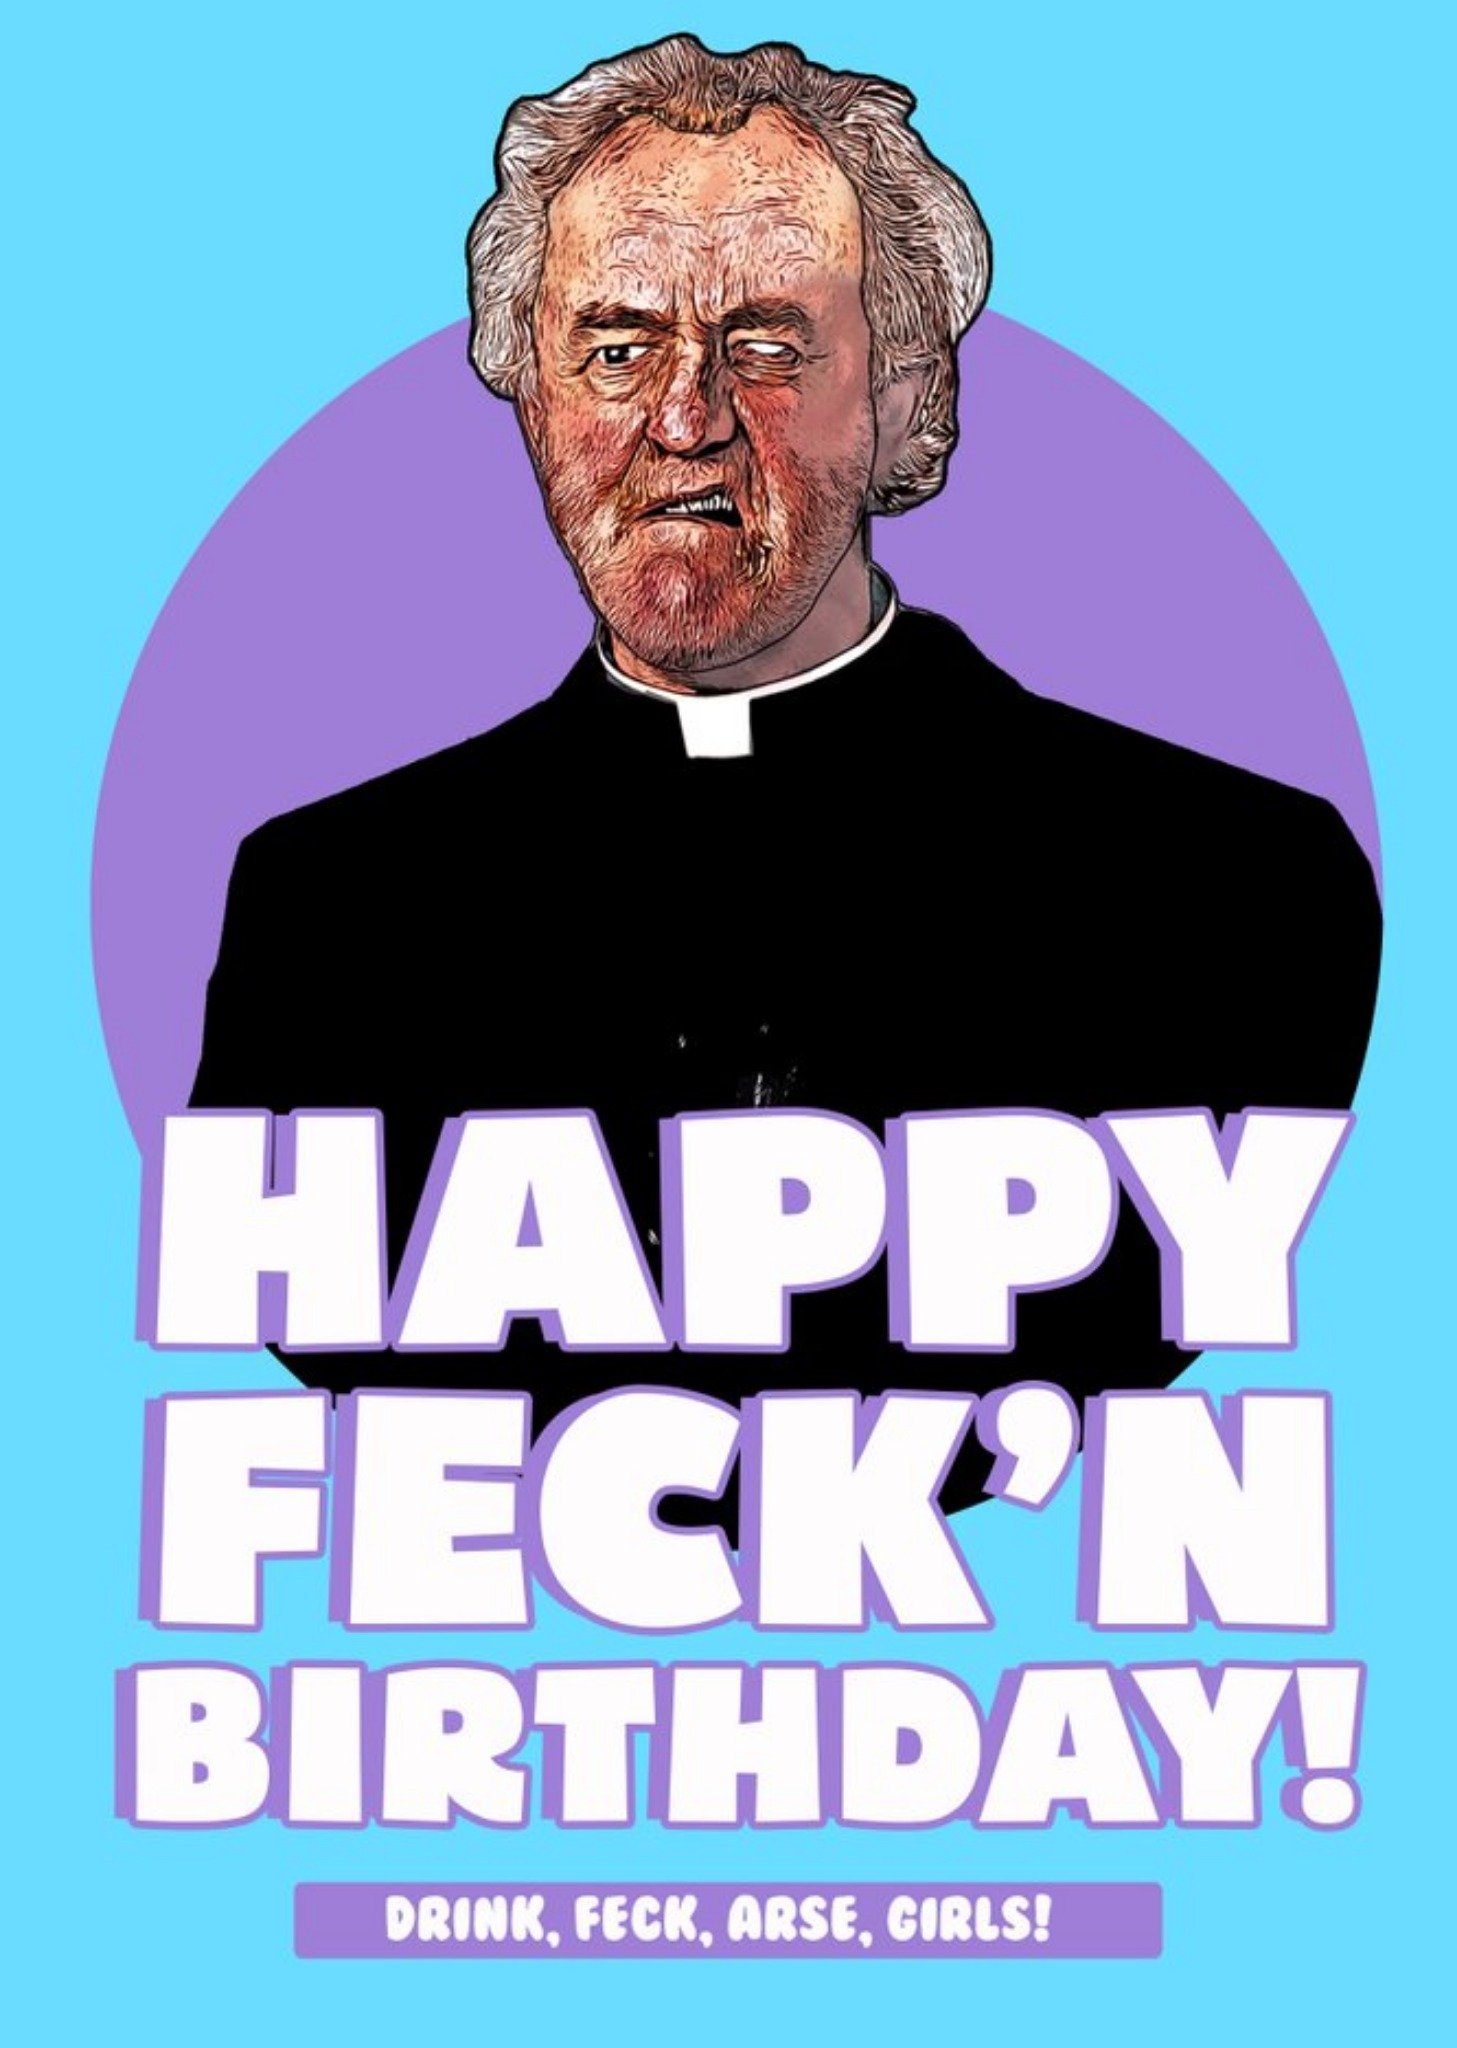 Moonpig Illustration Of Father Jack With Bold White Text On A Blue Background Hilarious Birthday Car